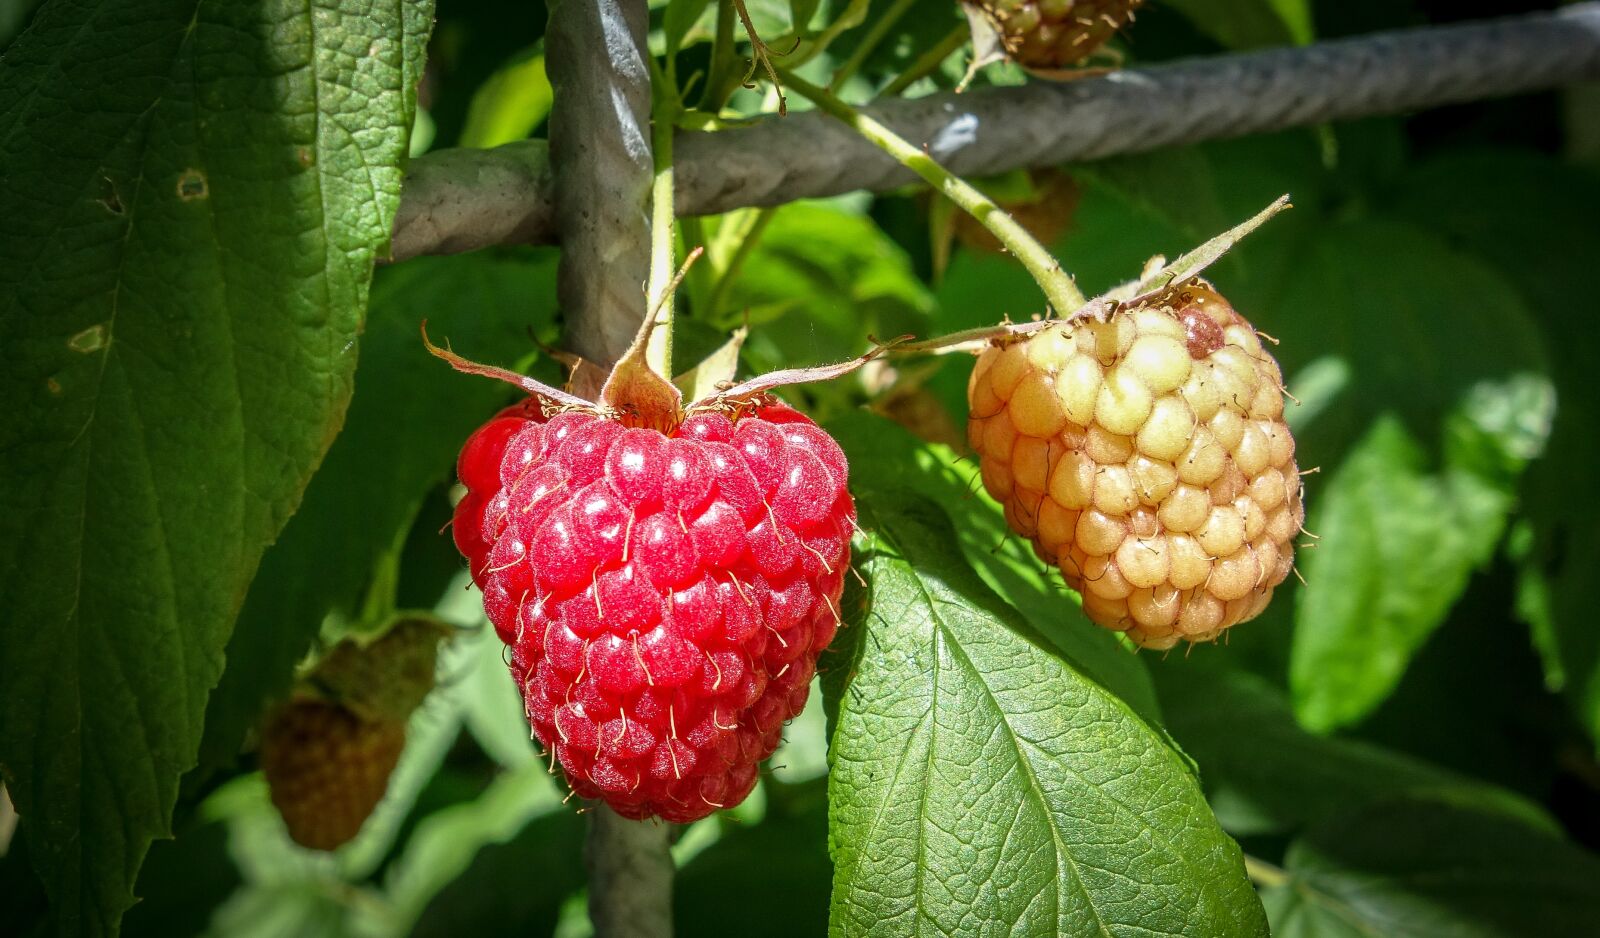 Sony Cyber-shot DSC-RX100 sample photo. Raspberries, himbeerstrauch, ripe photography